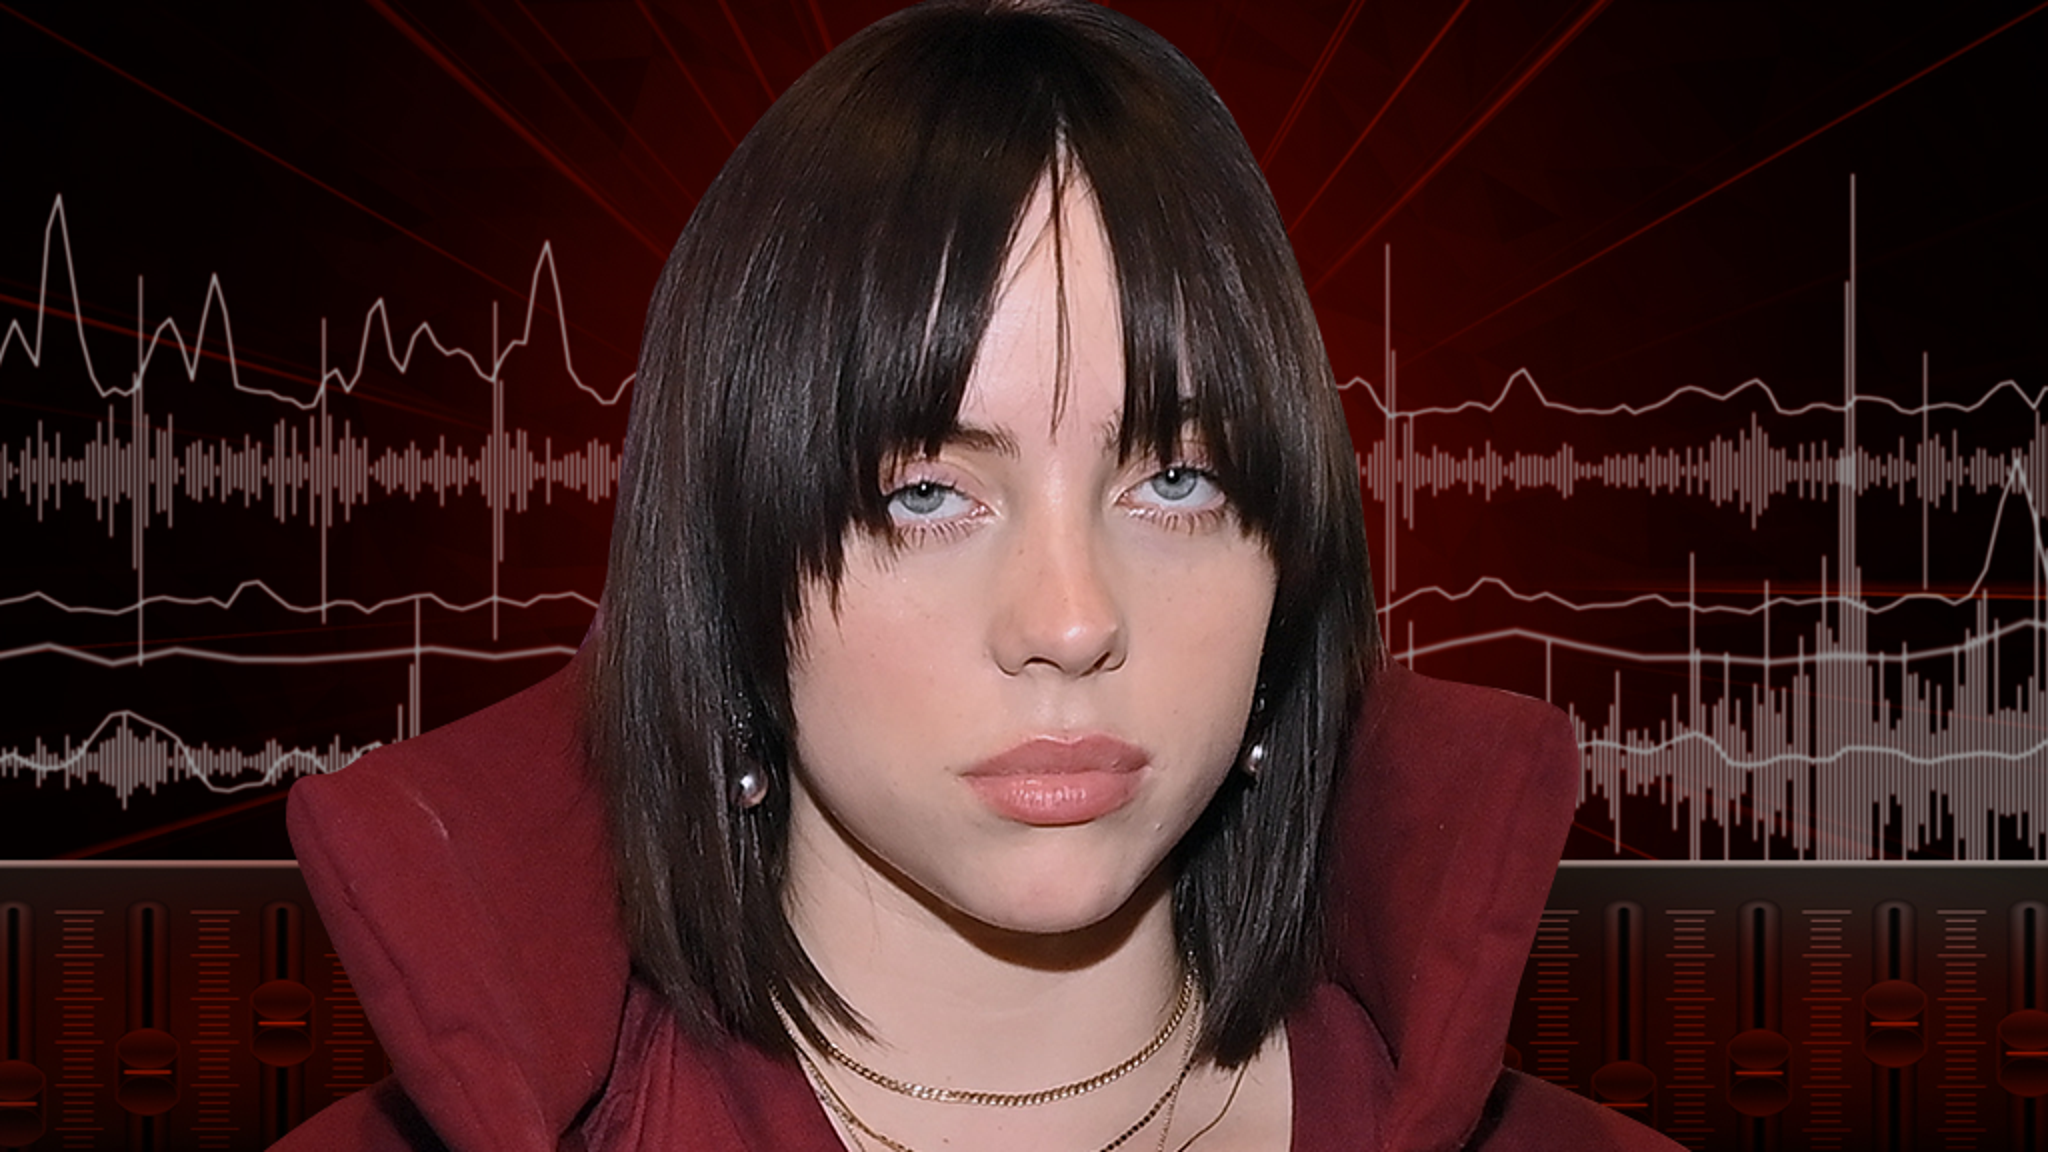 Www Sexi Video Paly Com - Billie Eilish Says She Started Watching Porn at 11, Calls it 'Disgrace'